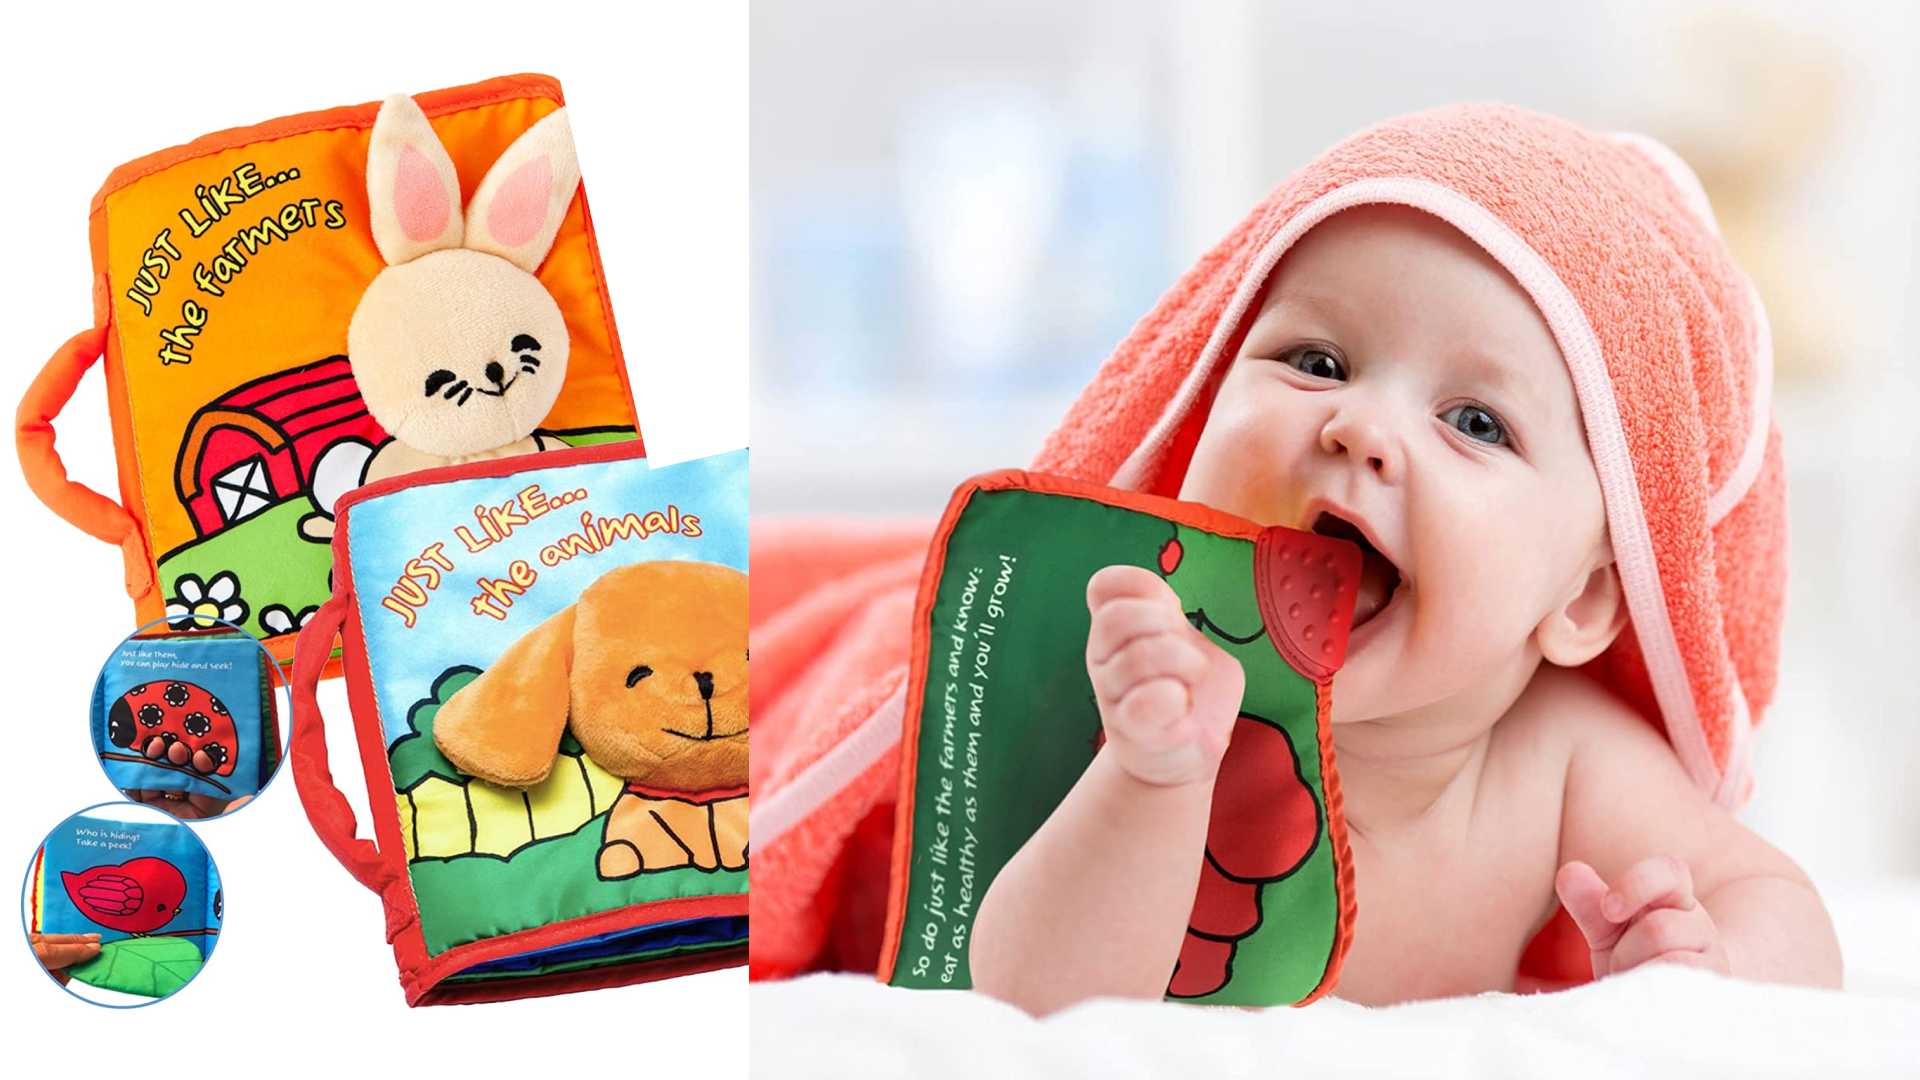 A soft baby book